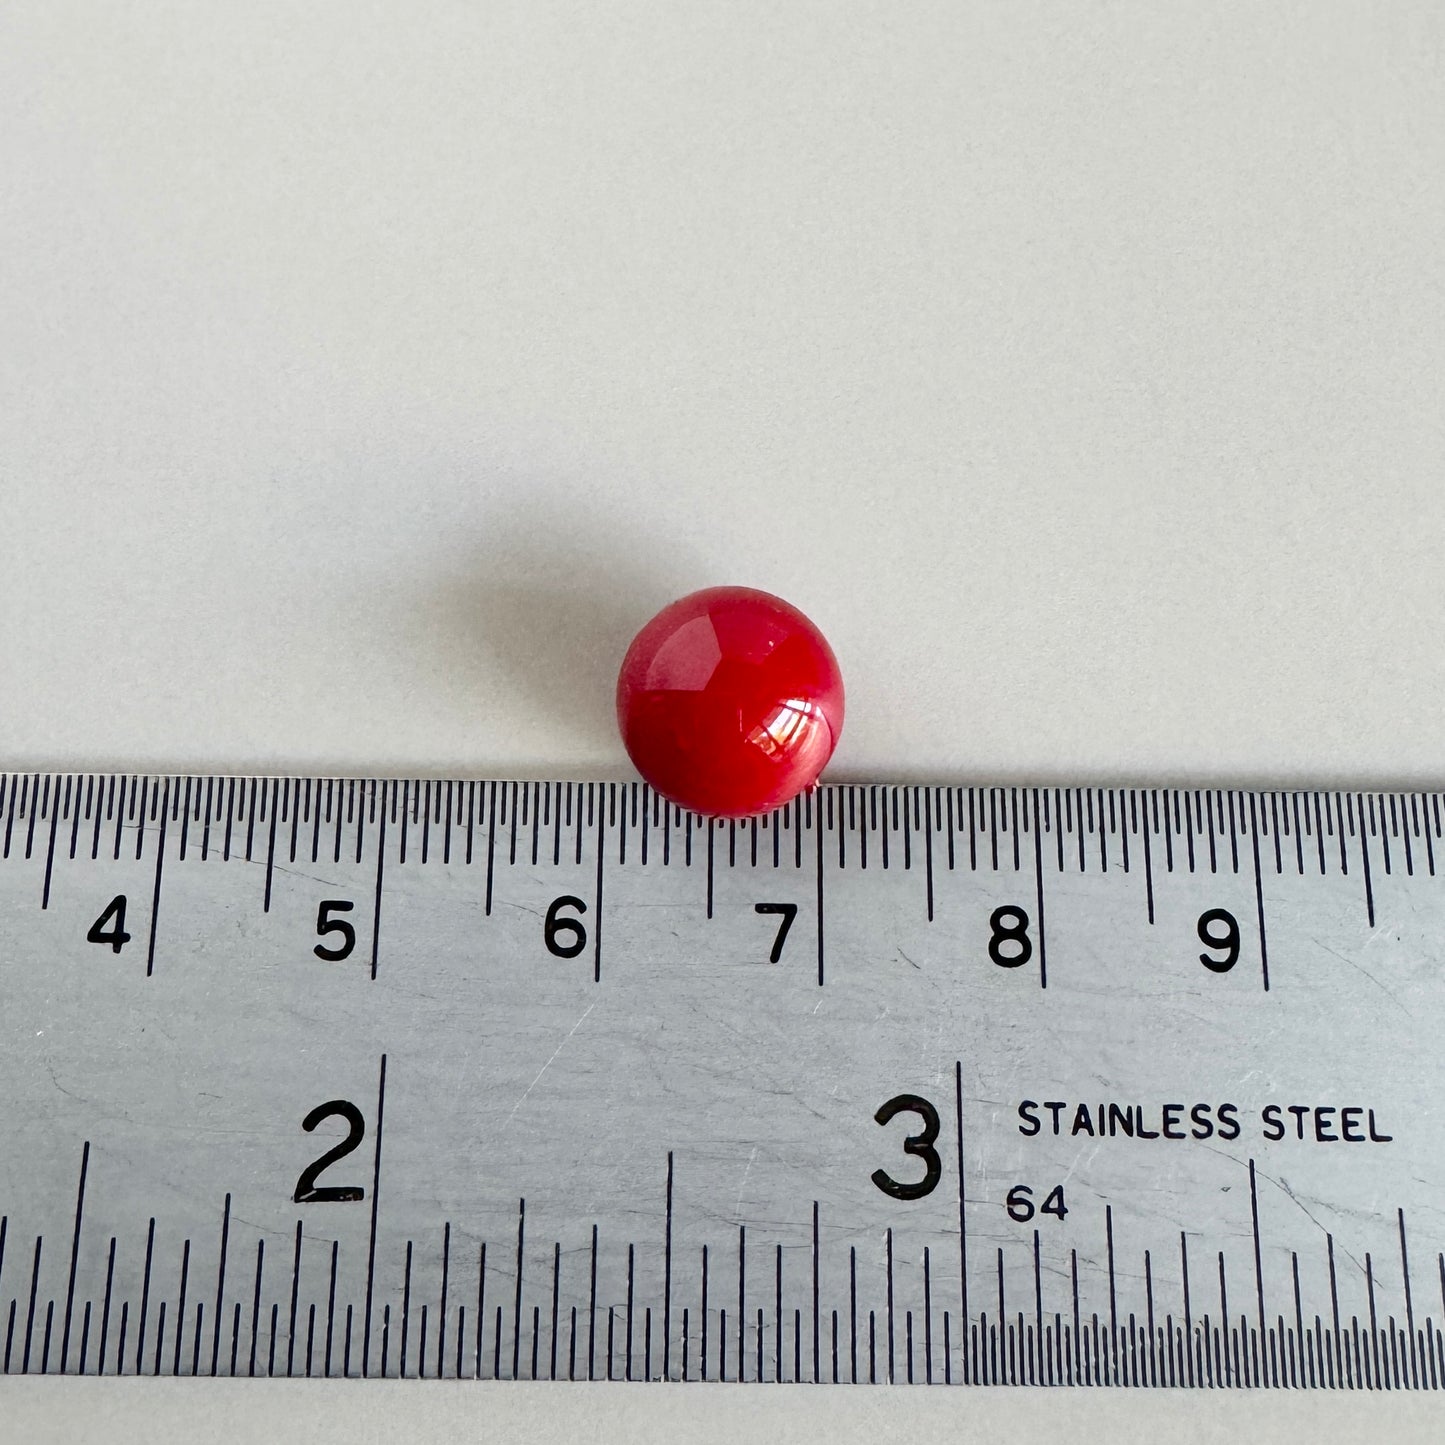 【Made in Japan 】AKADAMA Glass Beads Retro Red color coated 10mm【10 pcs or 1 strand】